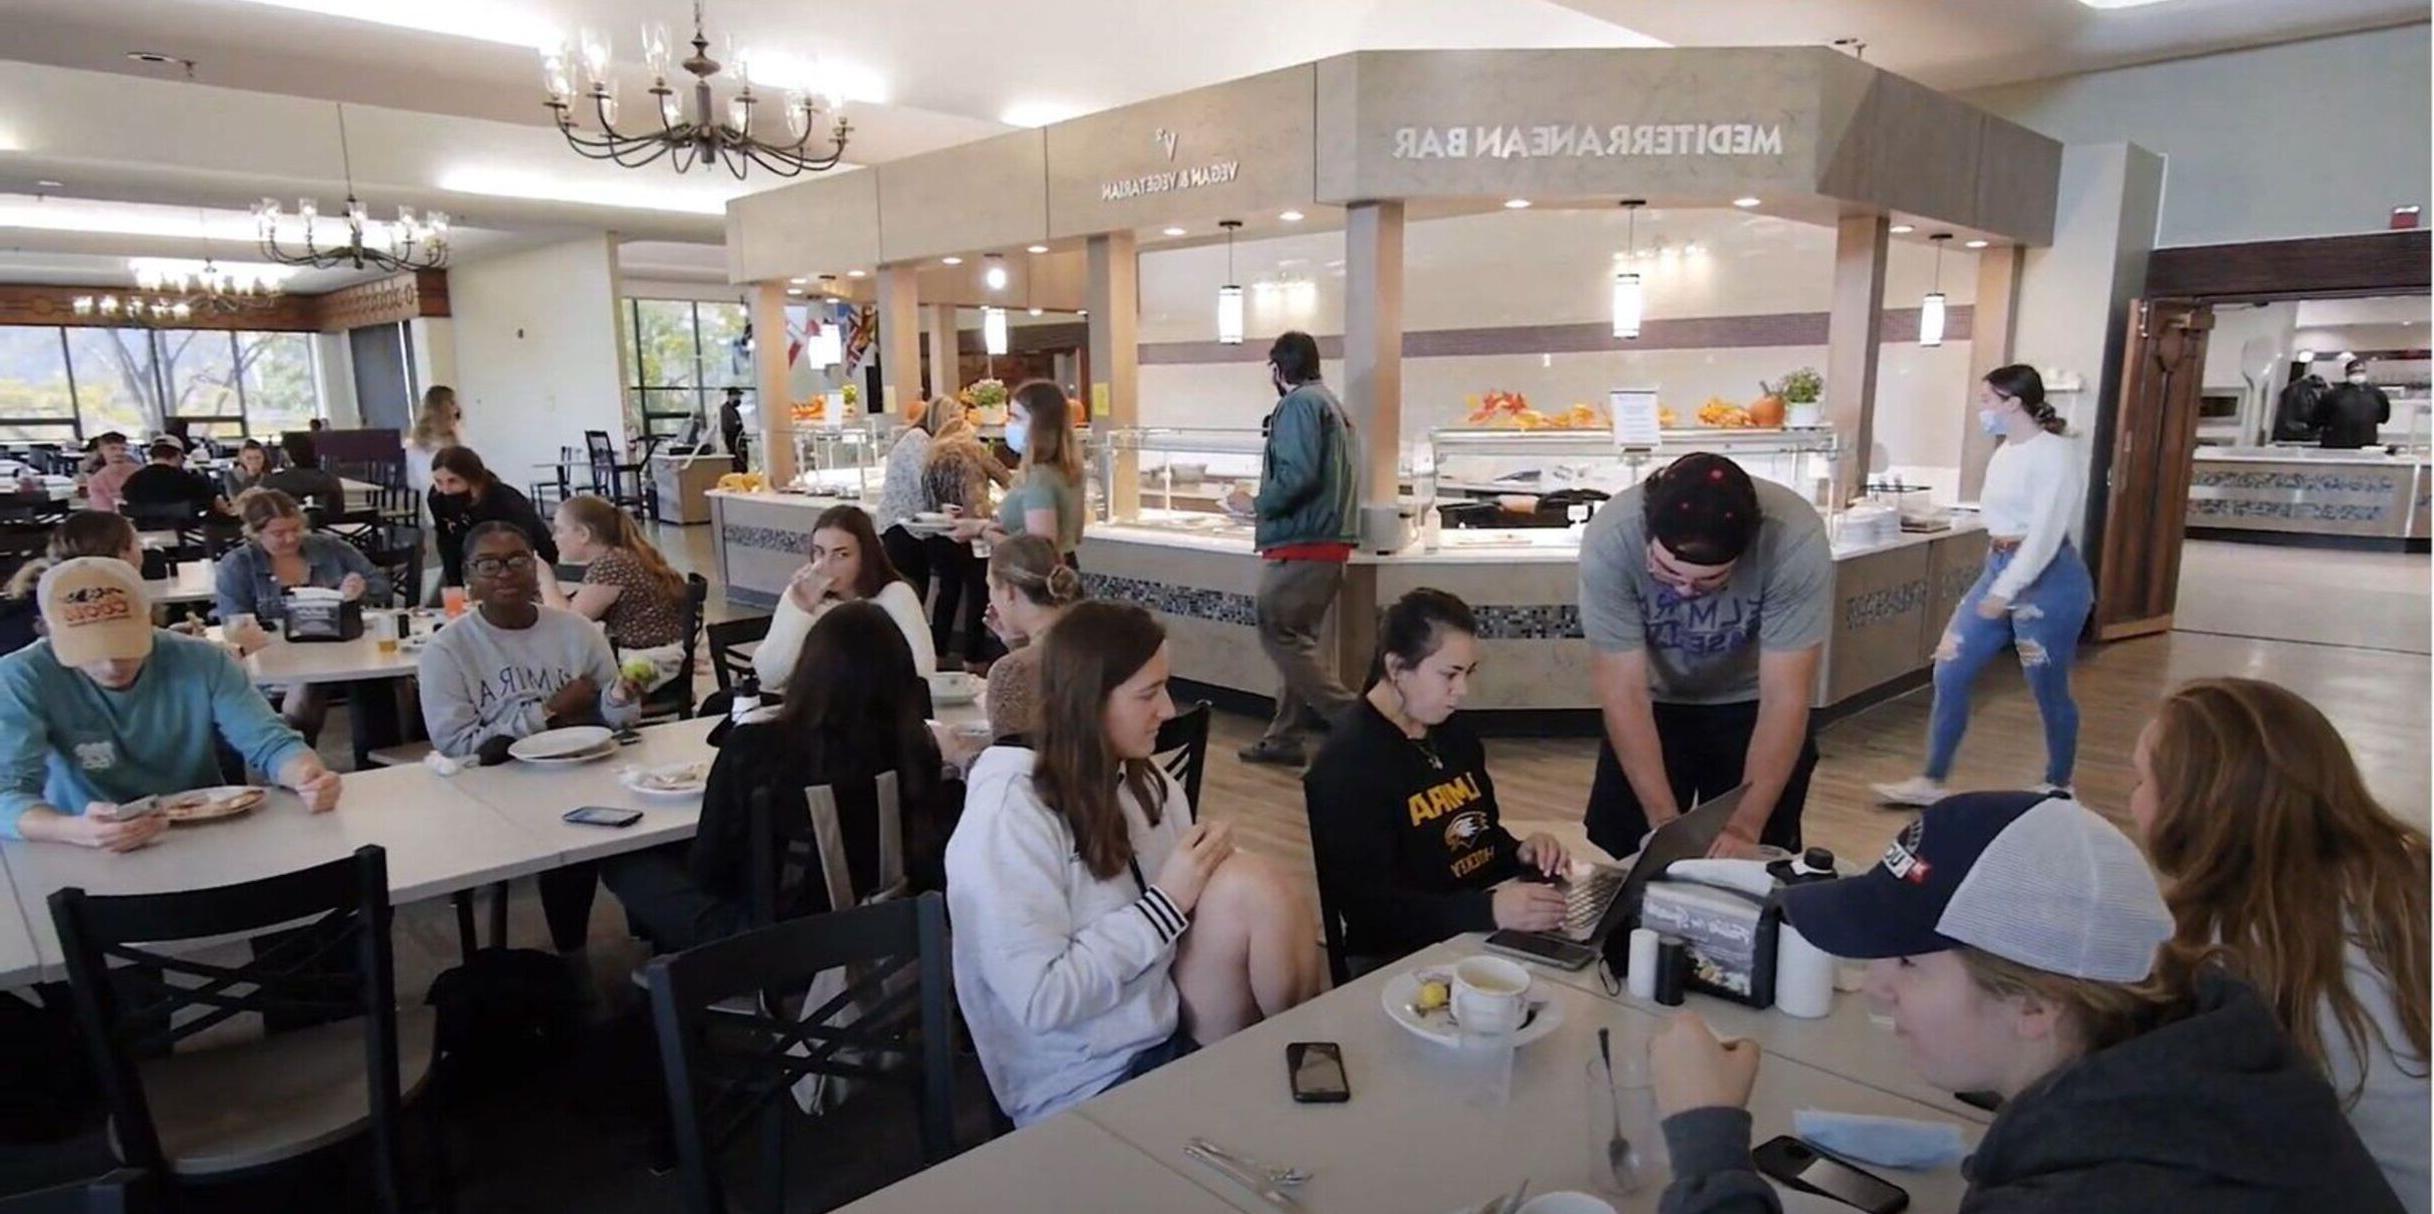 Students enjoy meals in the dining hall